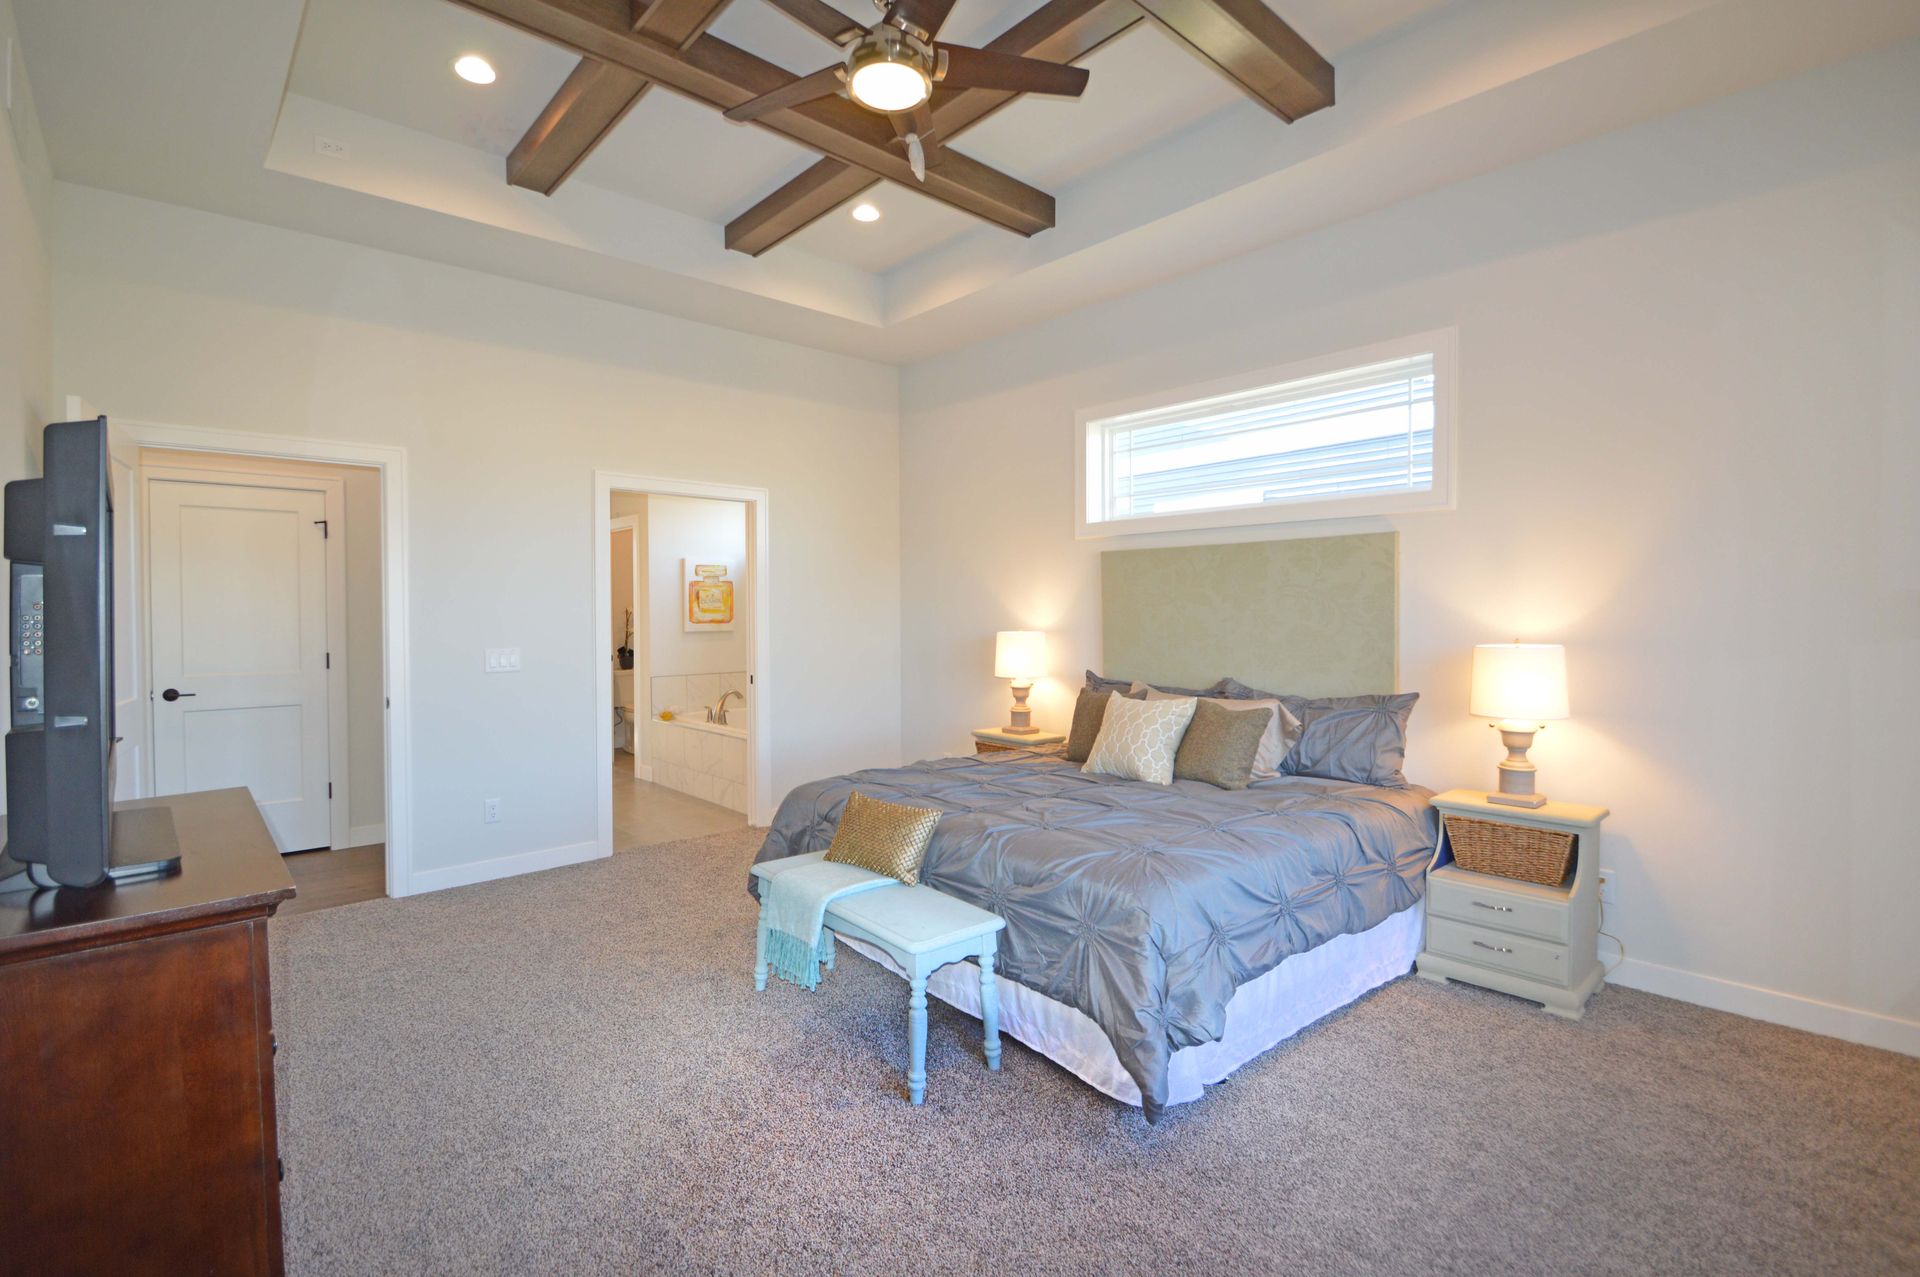 A bedroom with a king size bed , nightstands , a television and a ceiling fan.